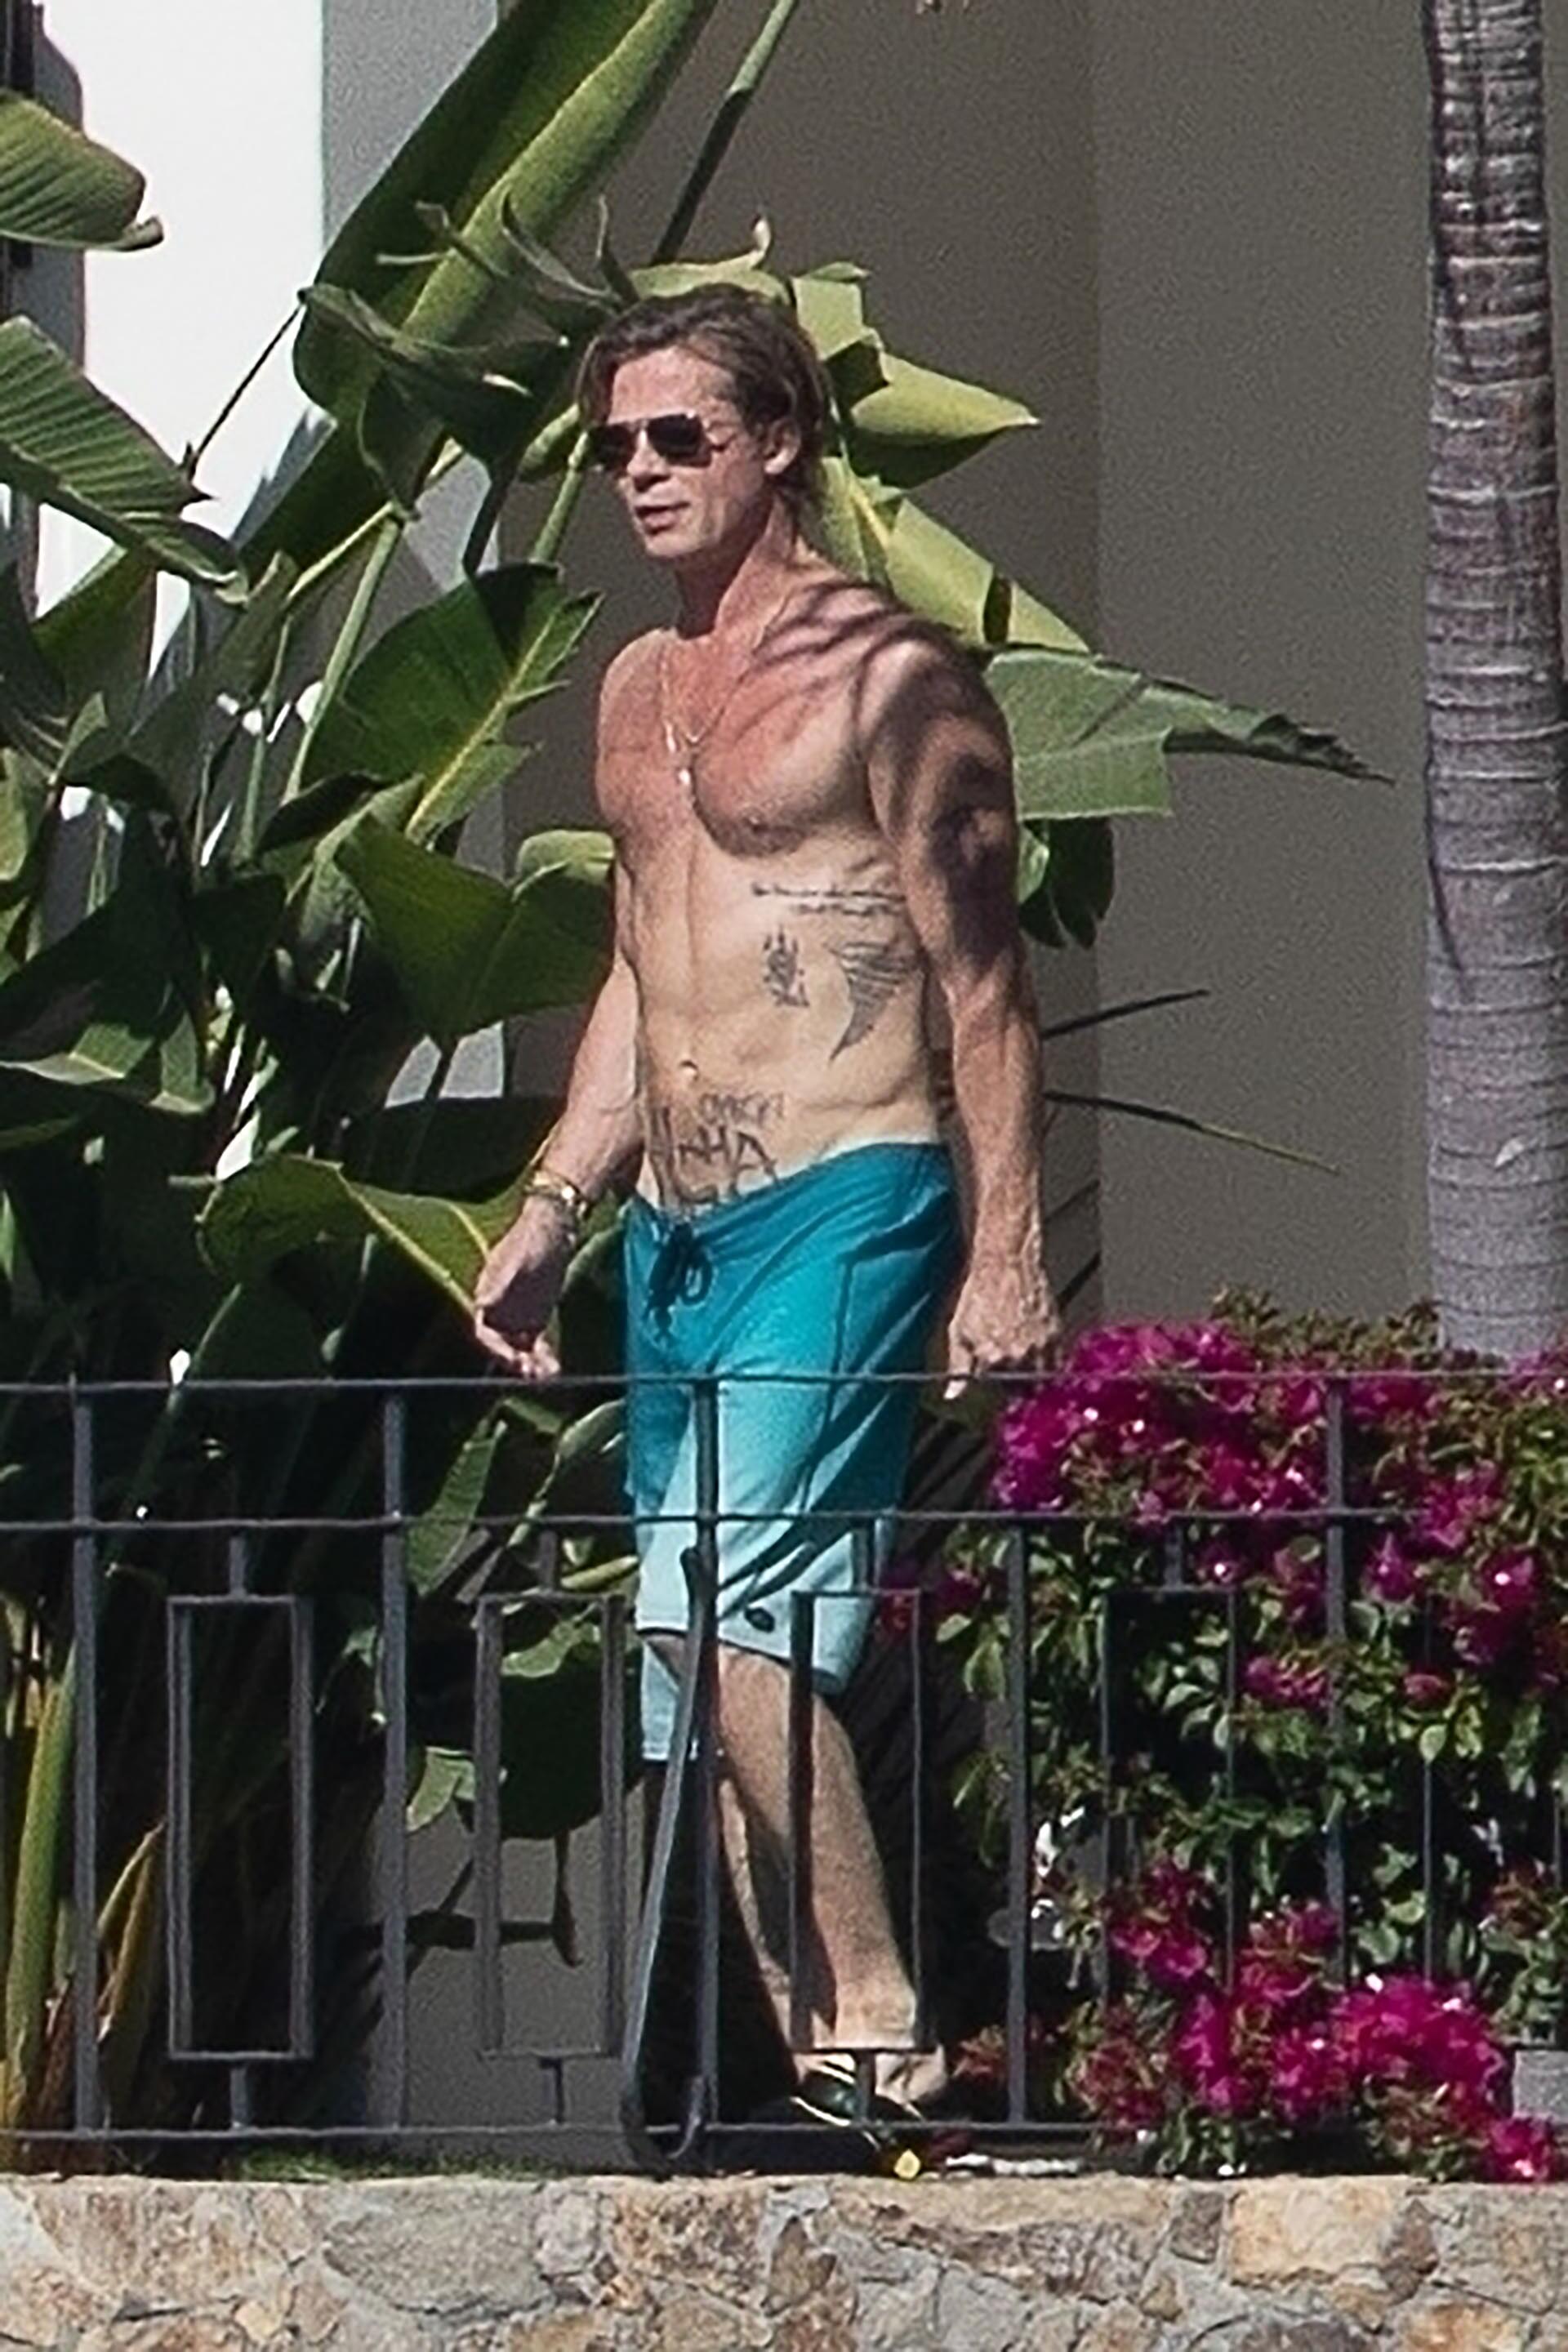 Brad Pitt showed off his many tattoos in a pair of blue bathing shorts and reading what appeared to be a script while Inés sunbathed next to him (The Grosby Group)